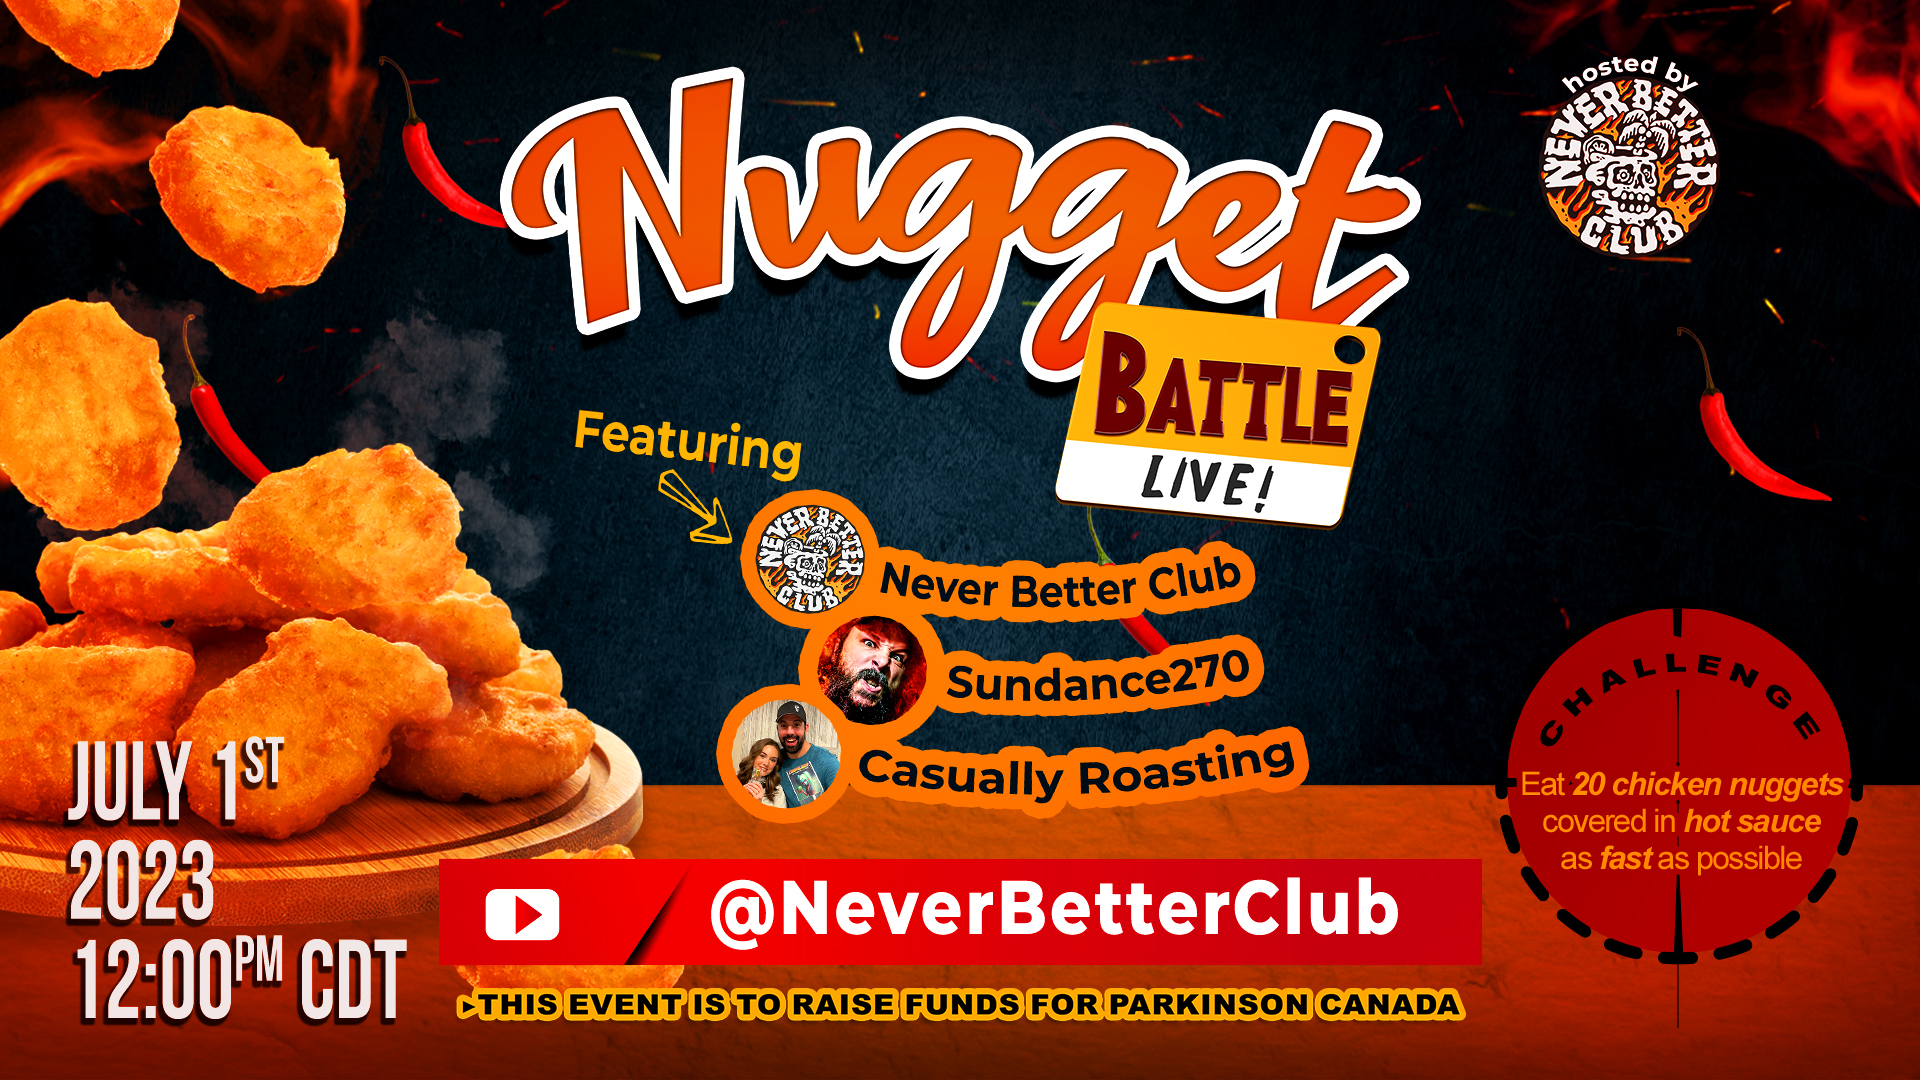 Nugget Battle! LIVE! To benefit Parkinson Canada – FEATURING Casually Roasting and Sundance270